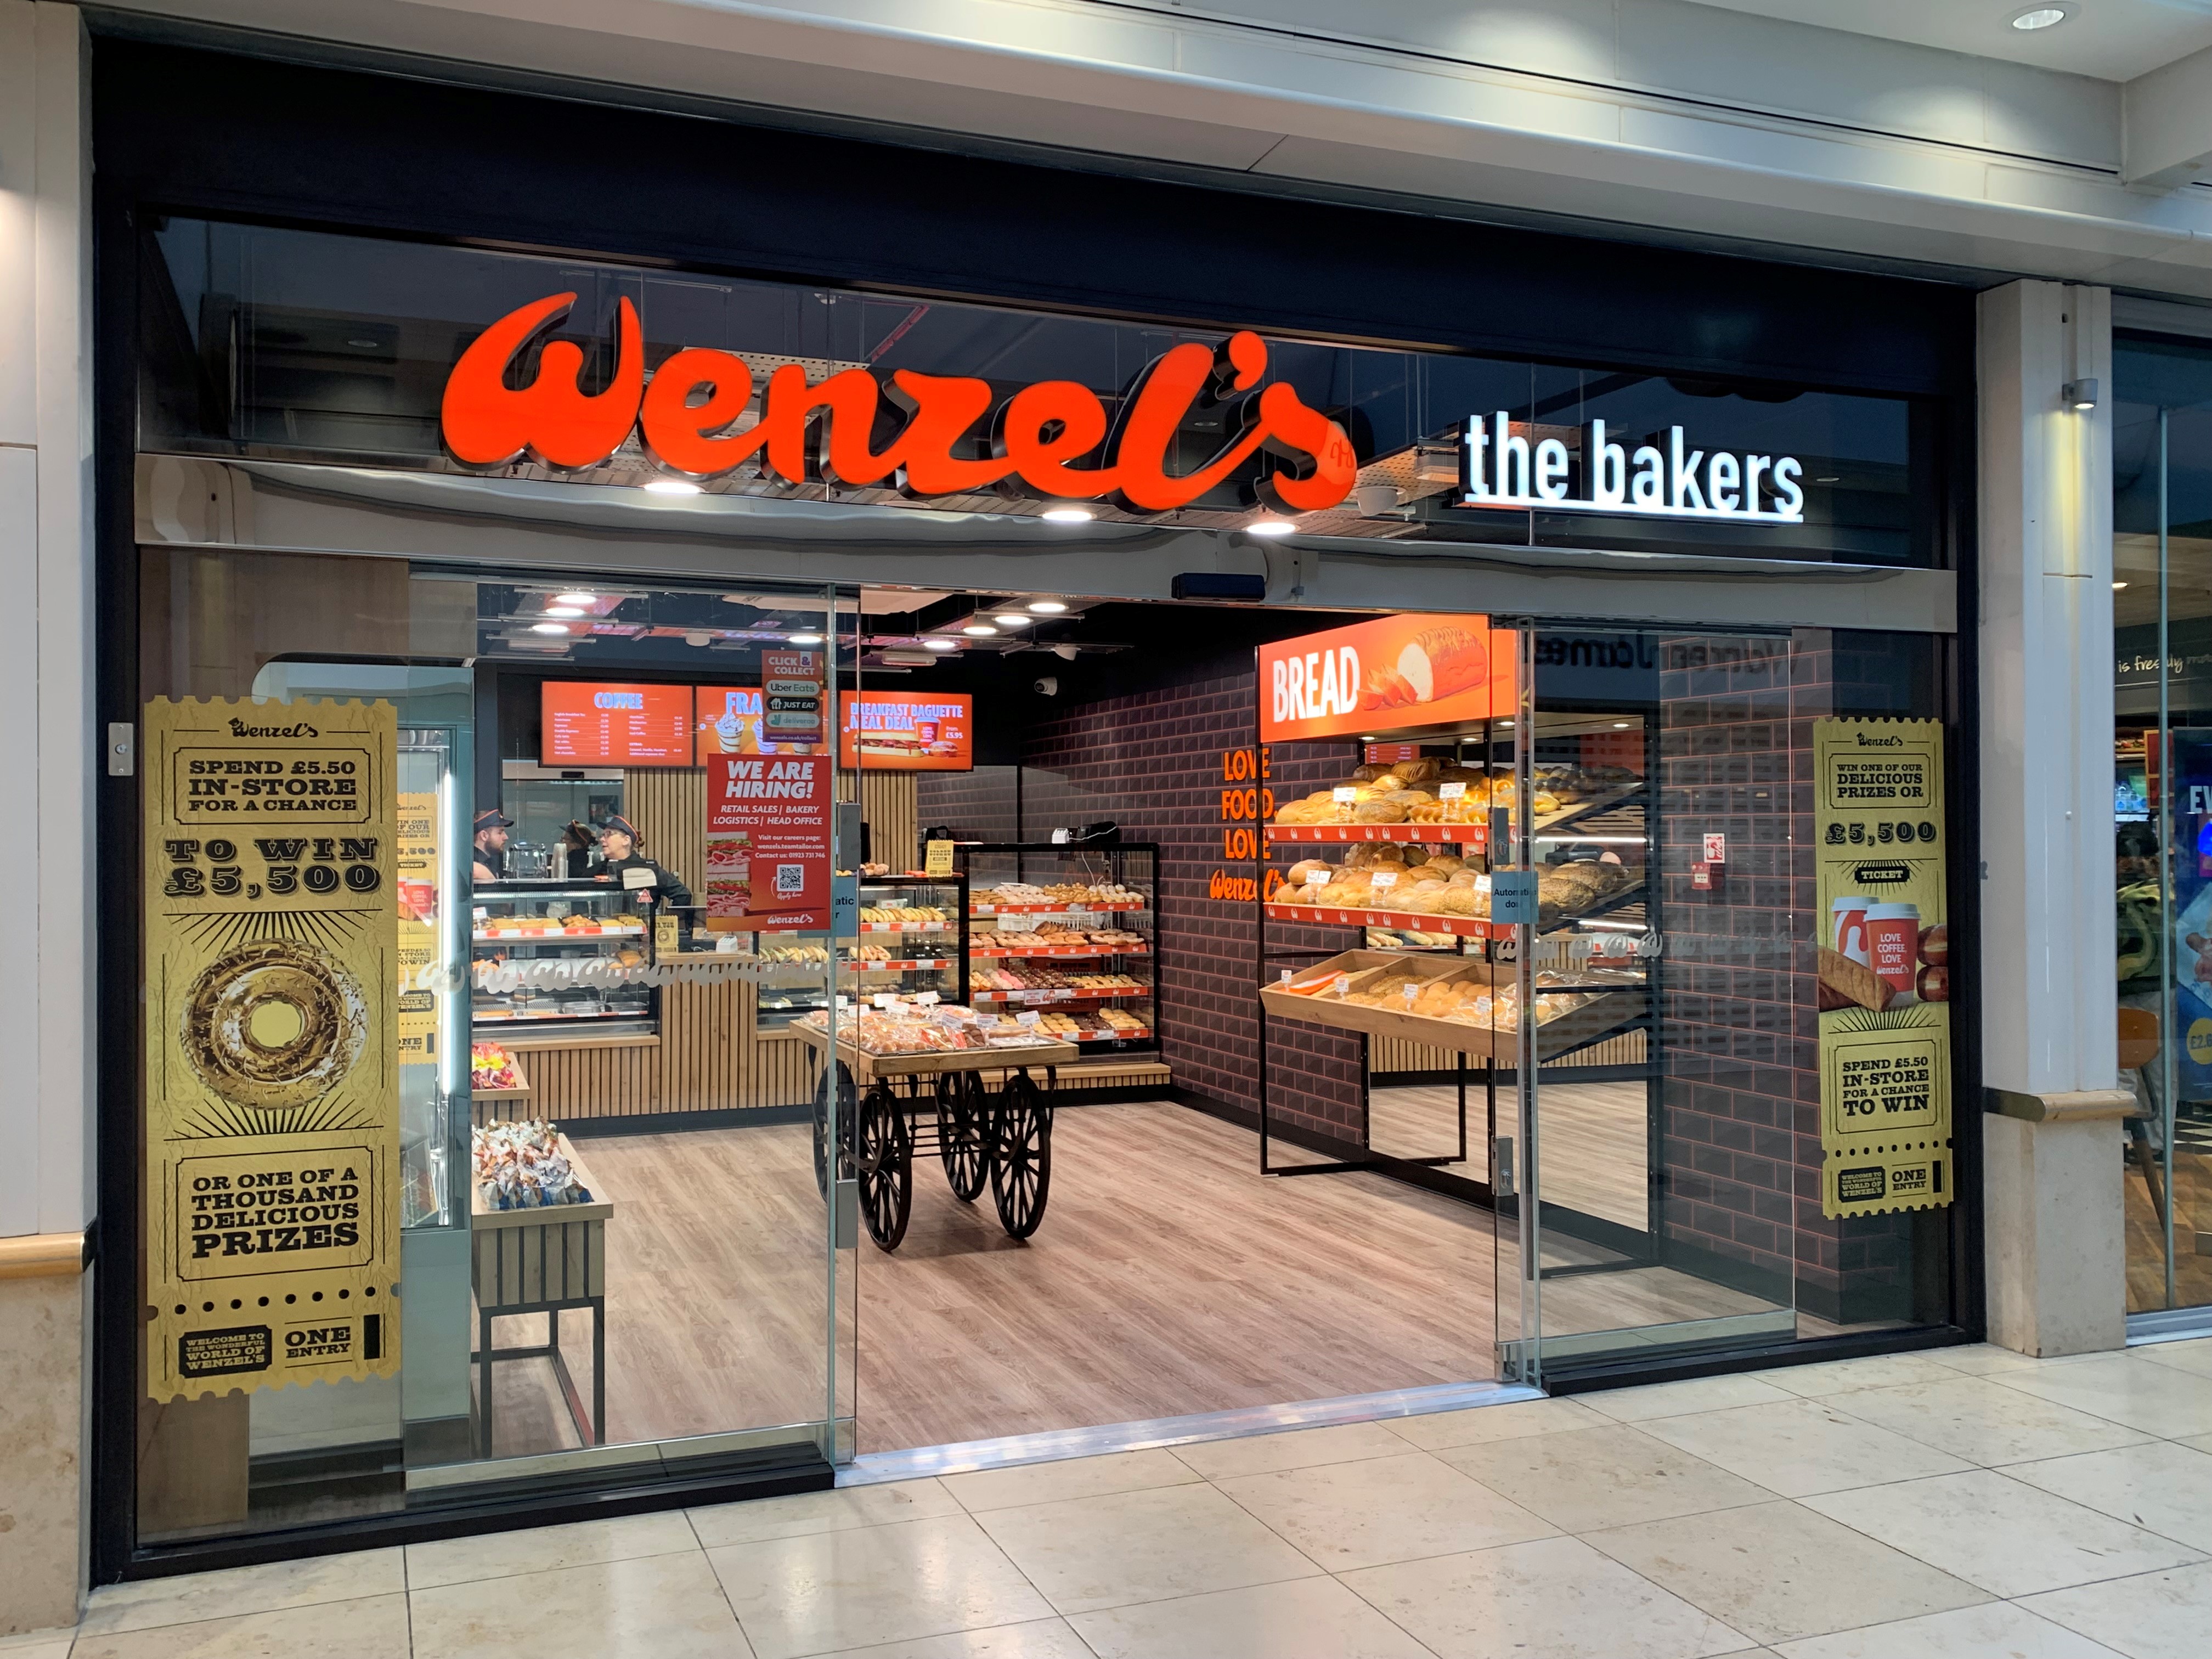 Wenzel's Bakery opens at Festival Place